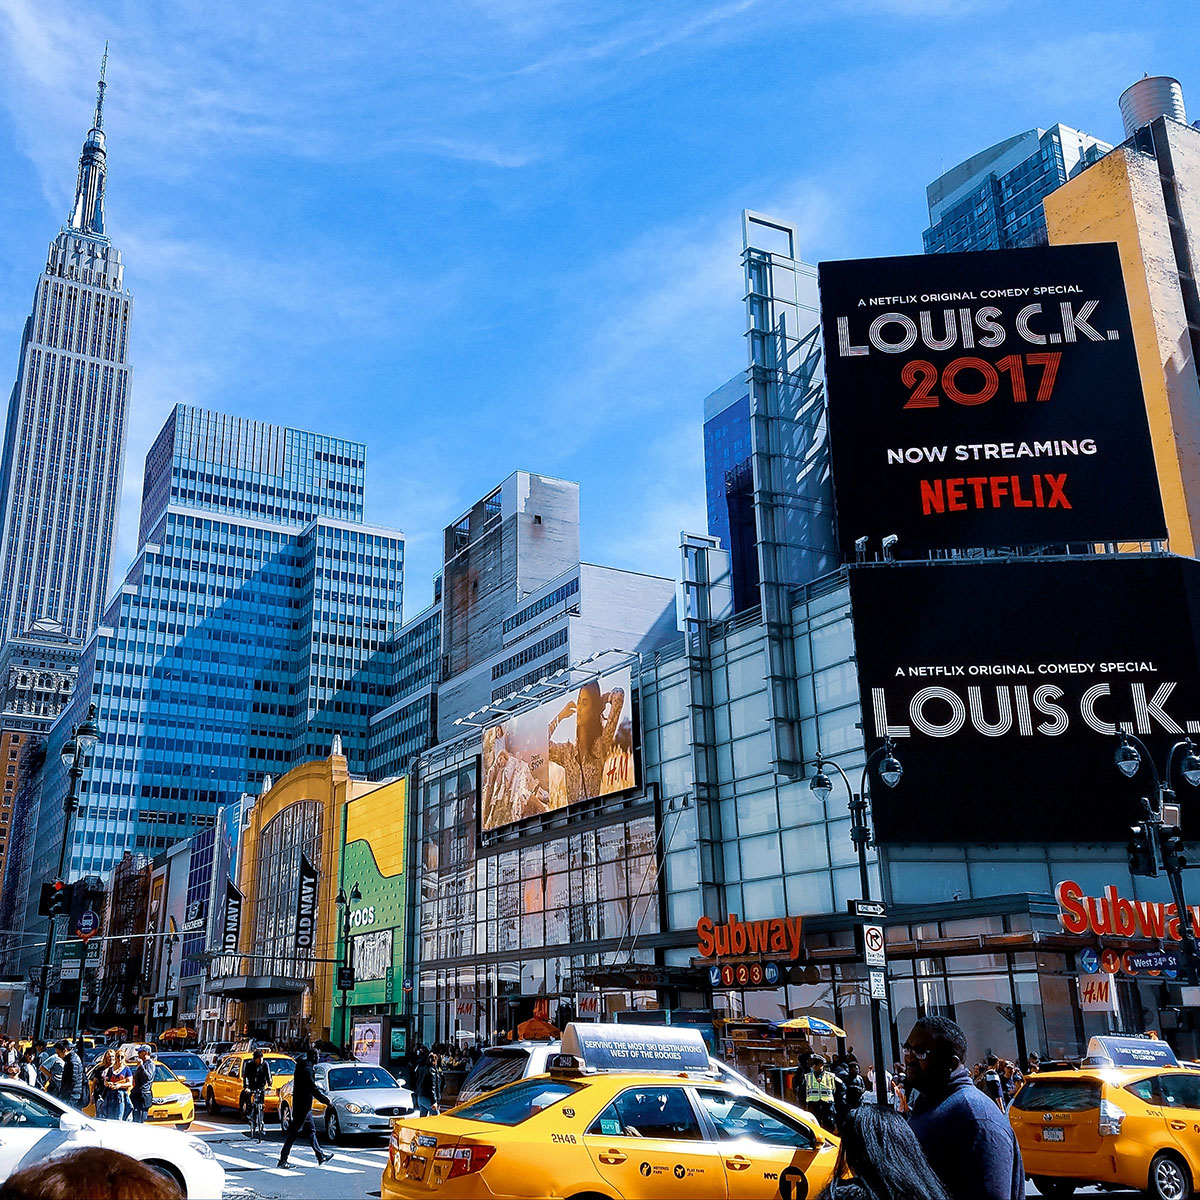 Meet the largest OOH billboard companies in the world